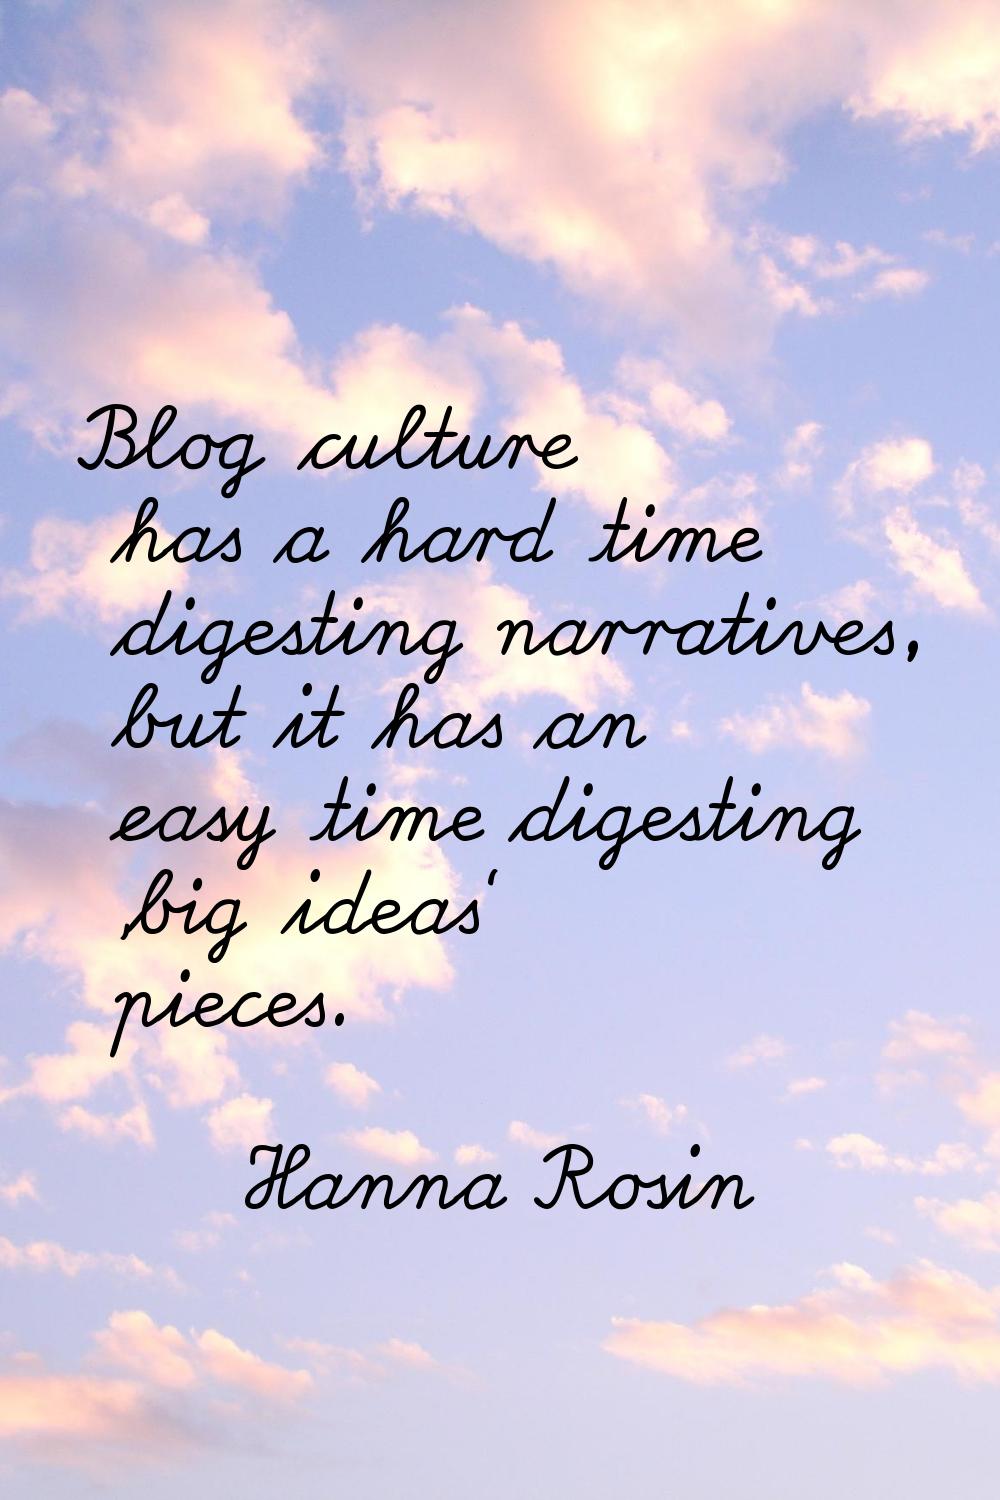 Blog culture has a hard time digesting narratives, but it has an easy time digesting 'big ideas' pi